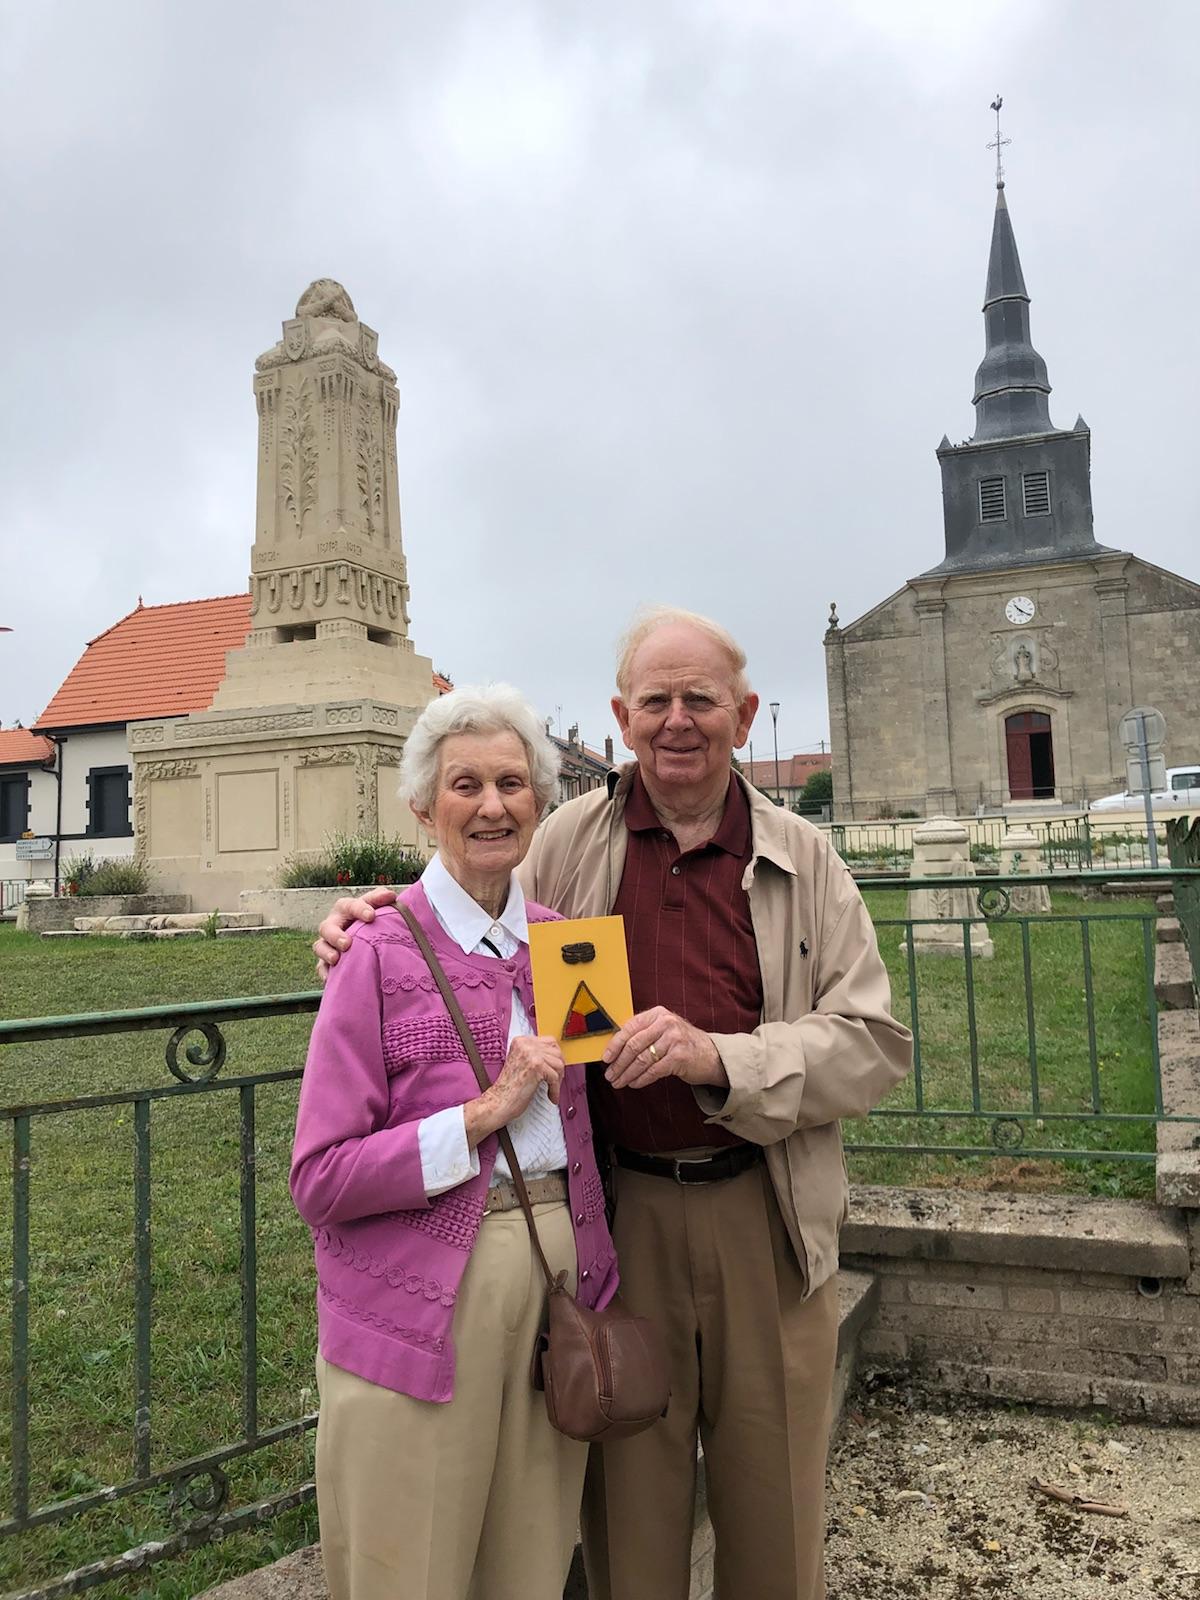 An older white couple standing in front of a monument and a church. The woman wears a pink cardigan. The man wears a tan jacket.